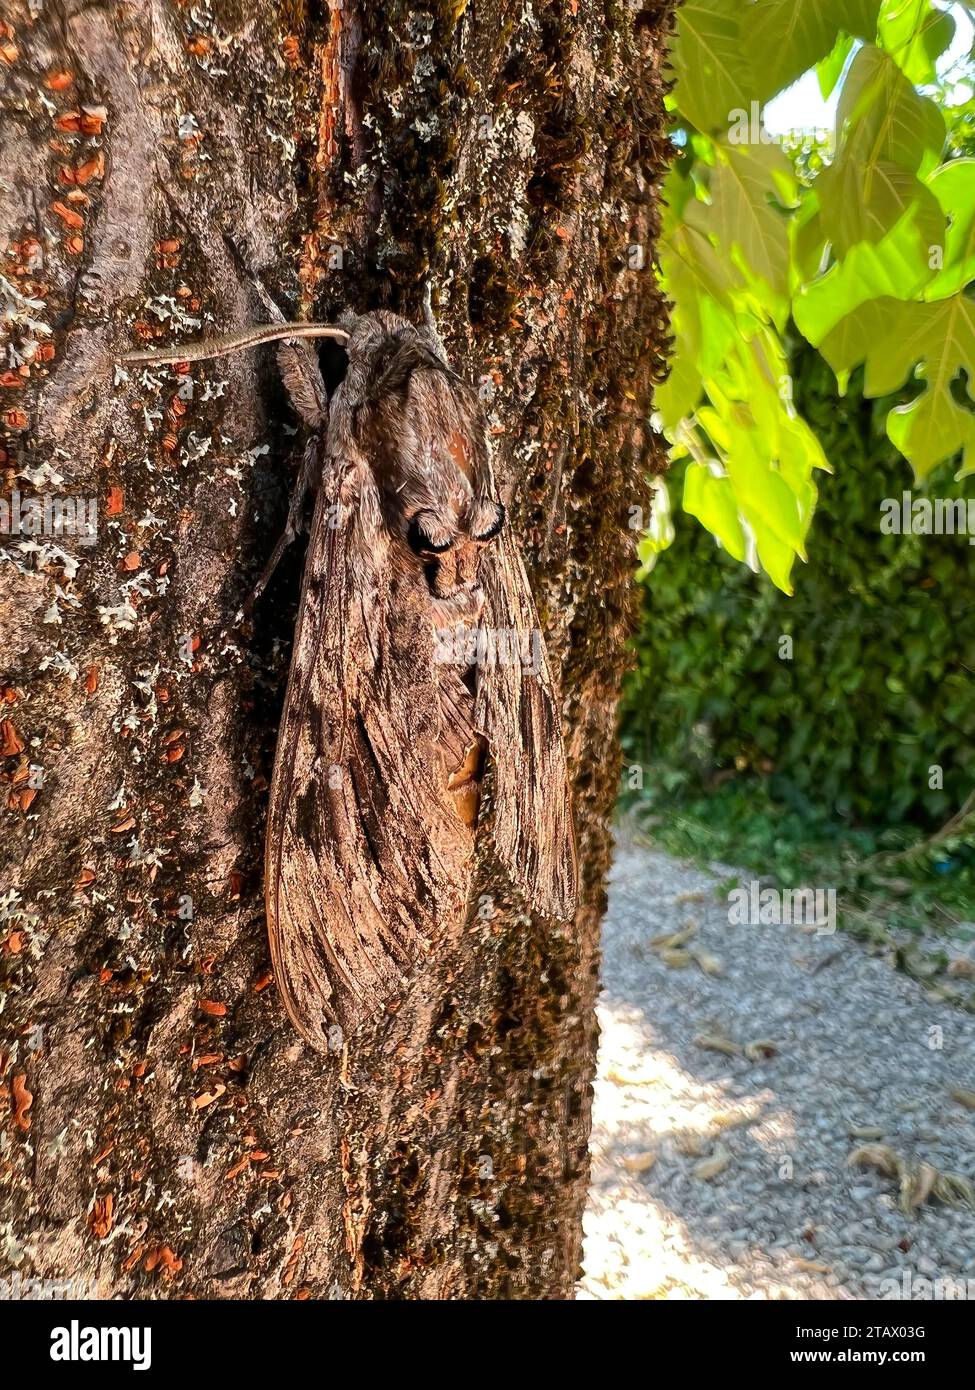 Natural closeup on an impressive large grey colored Convolvulus hawk-moth, Agrius convolvuli, resting camouflaged on the trunk of a tree during the da Stock Photo